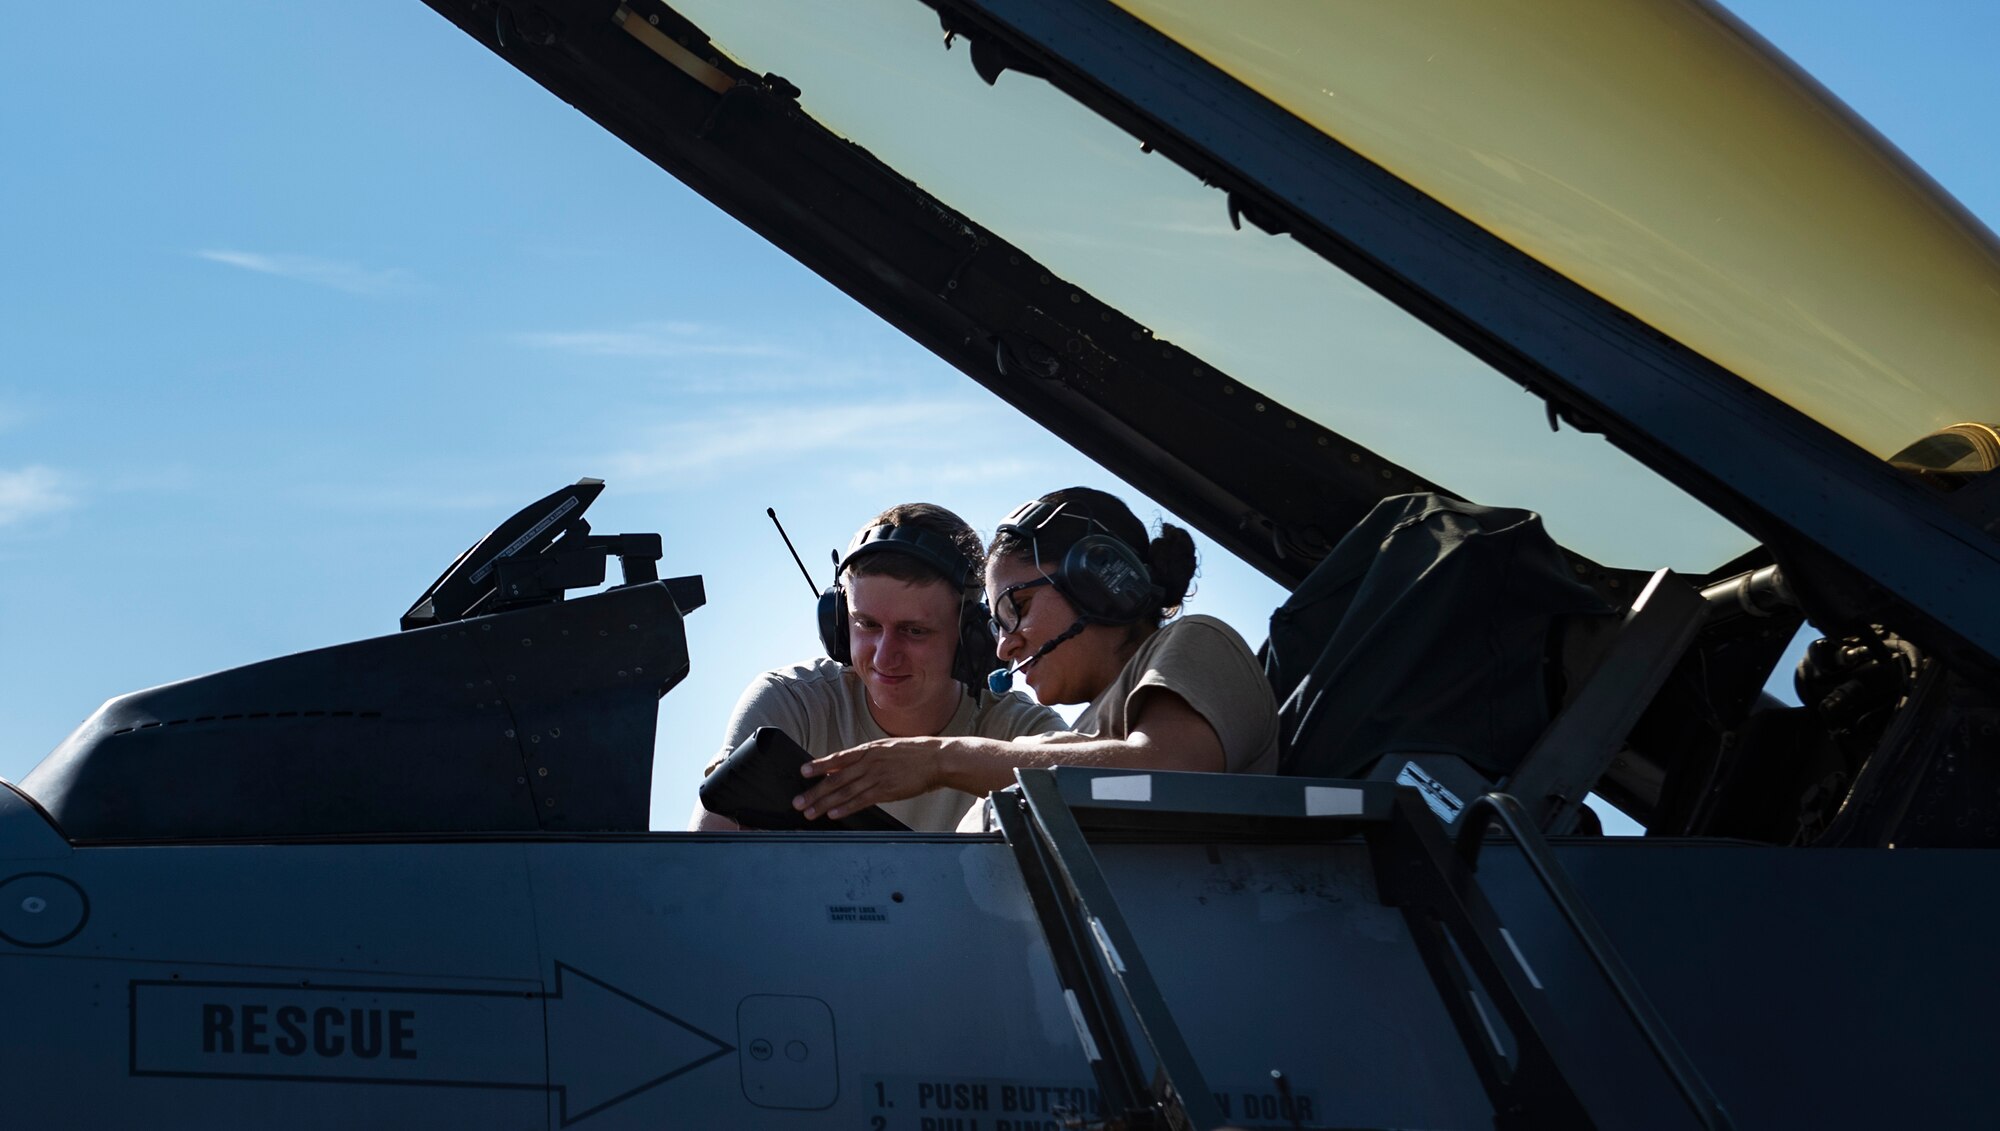 Staff Sgt. Diana Jimenez, right, 362nd Training Squadron F-16 crew chief apprentice course instructor, talks to a student while inside an F-16 Fighting Falcon aircraft at Sheppard Air Force Base, Texas, July 2, 2019. Jimenez is showing the student the lights operations check checklist and shows him which ones are done in the flightdeck. (U.S. Air Force photo by Airman 1st Class Pedro Tenorio)